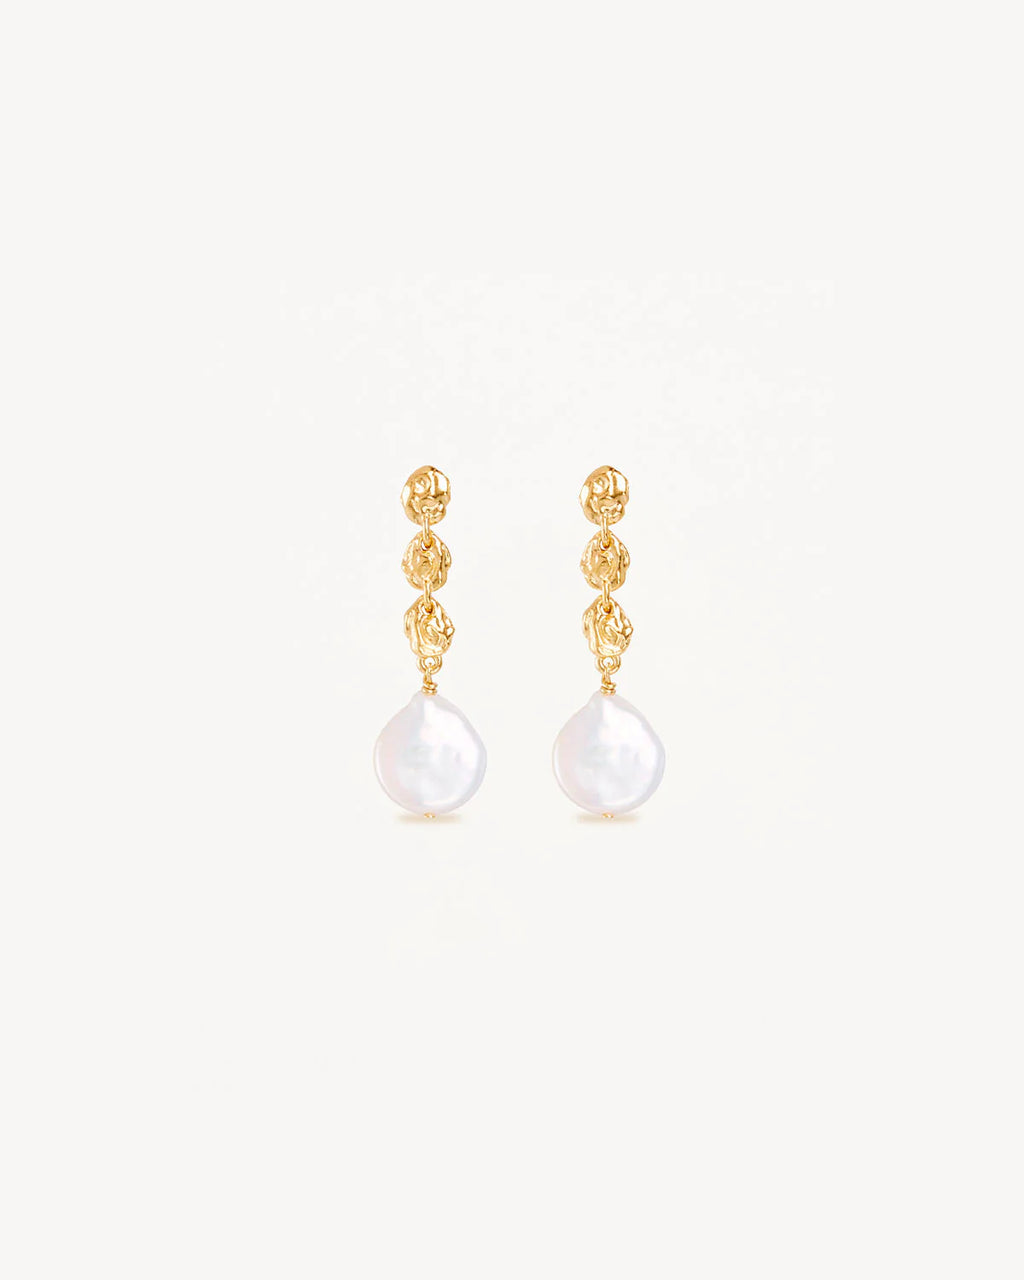 By Charlotte - Grow With Grace Earrings - Gold